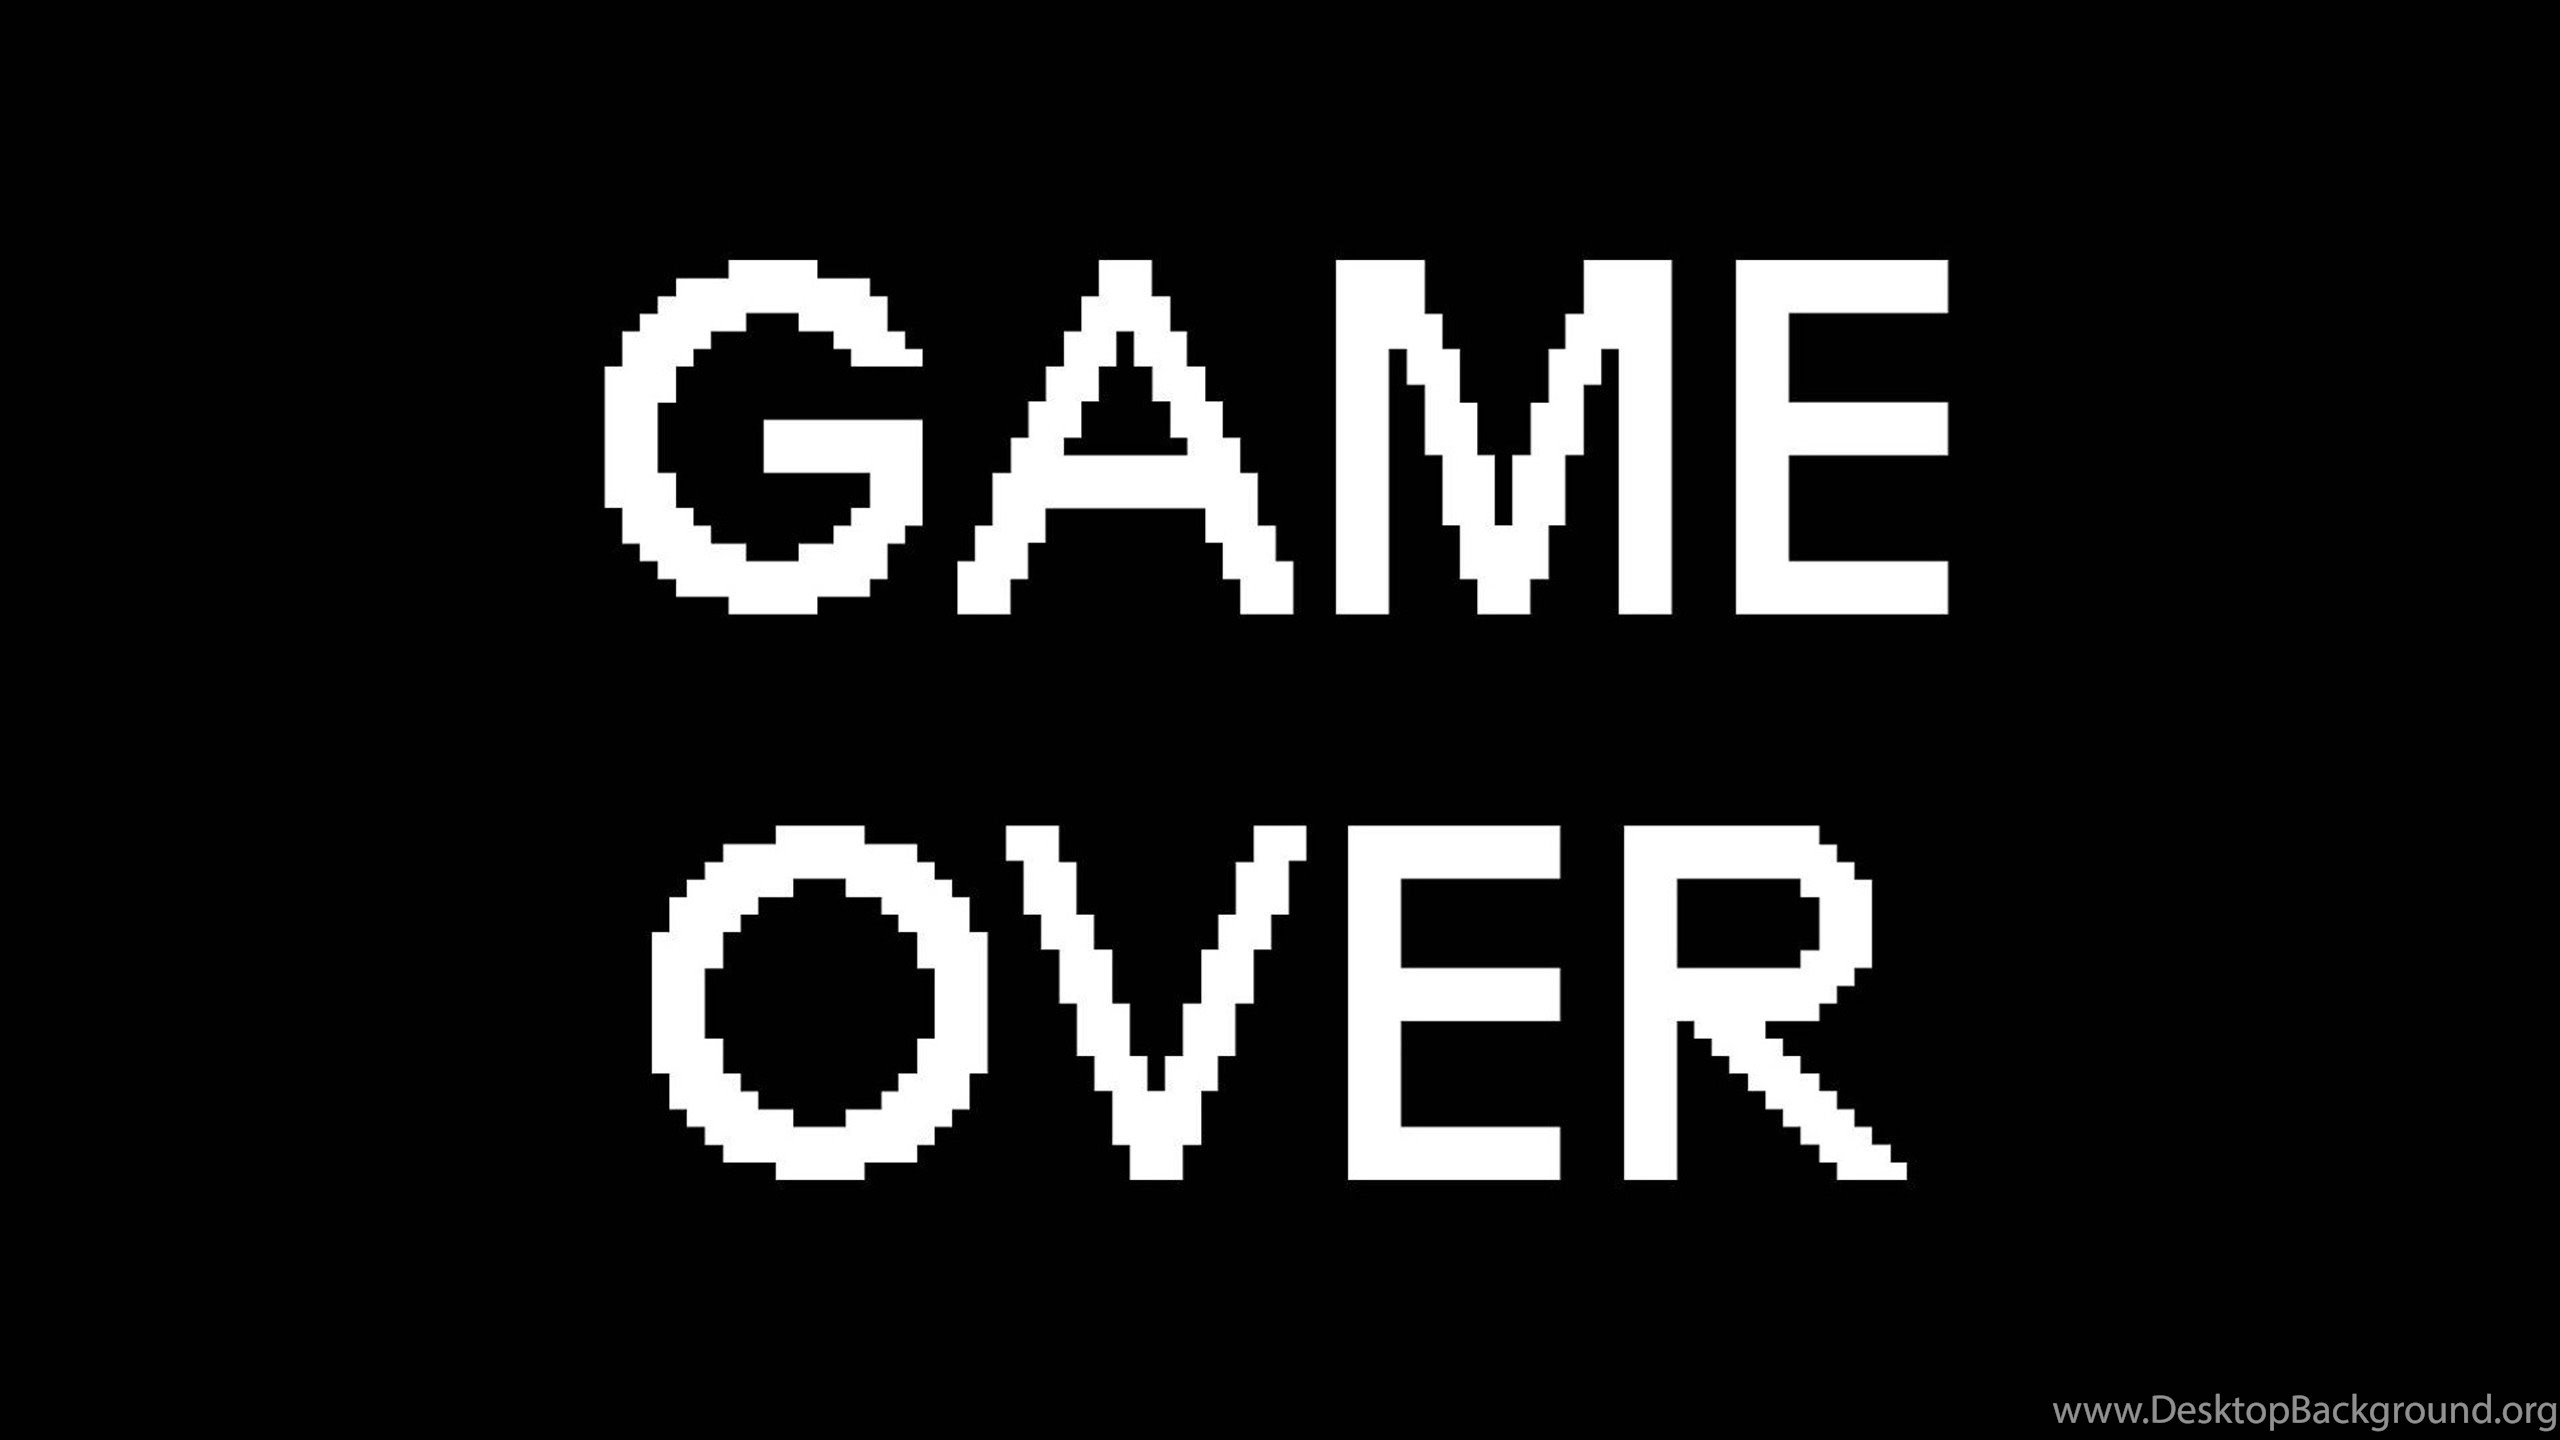 Won me over. Game over. Надпись game over. Game over на черном фоне. Надпись гейм овер на черном фоне.